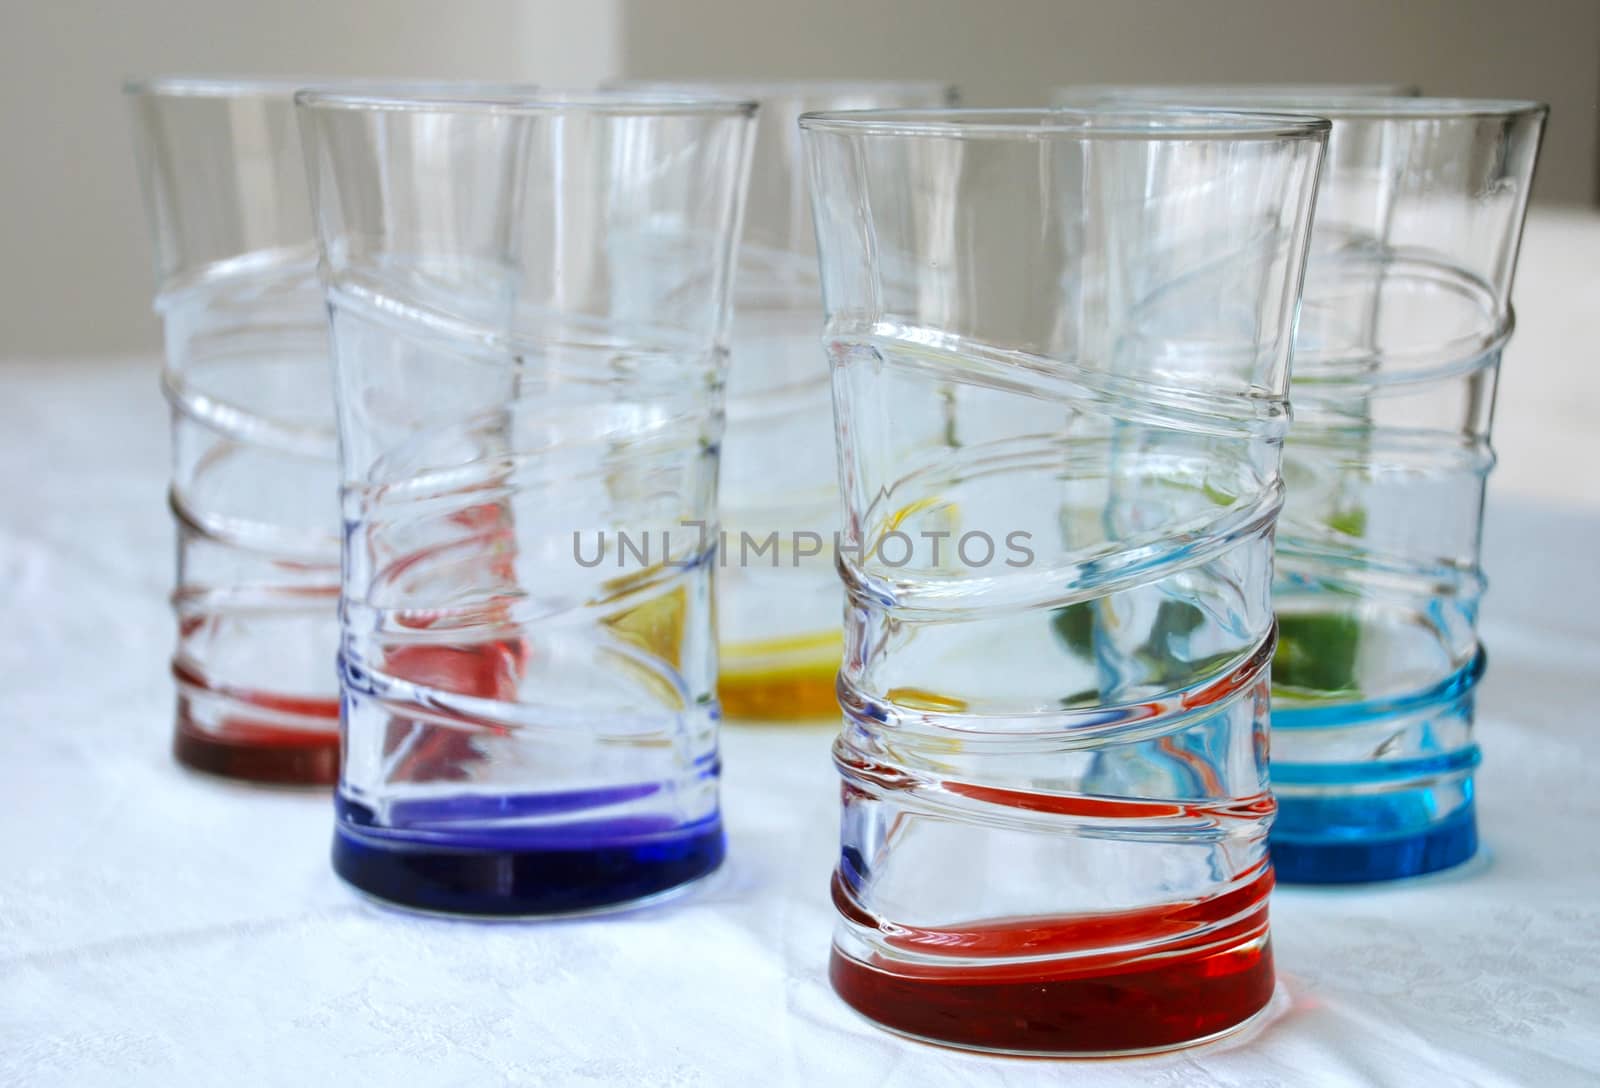 six brightly colored beverage glasses